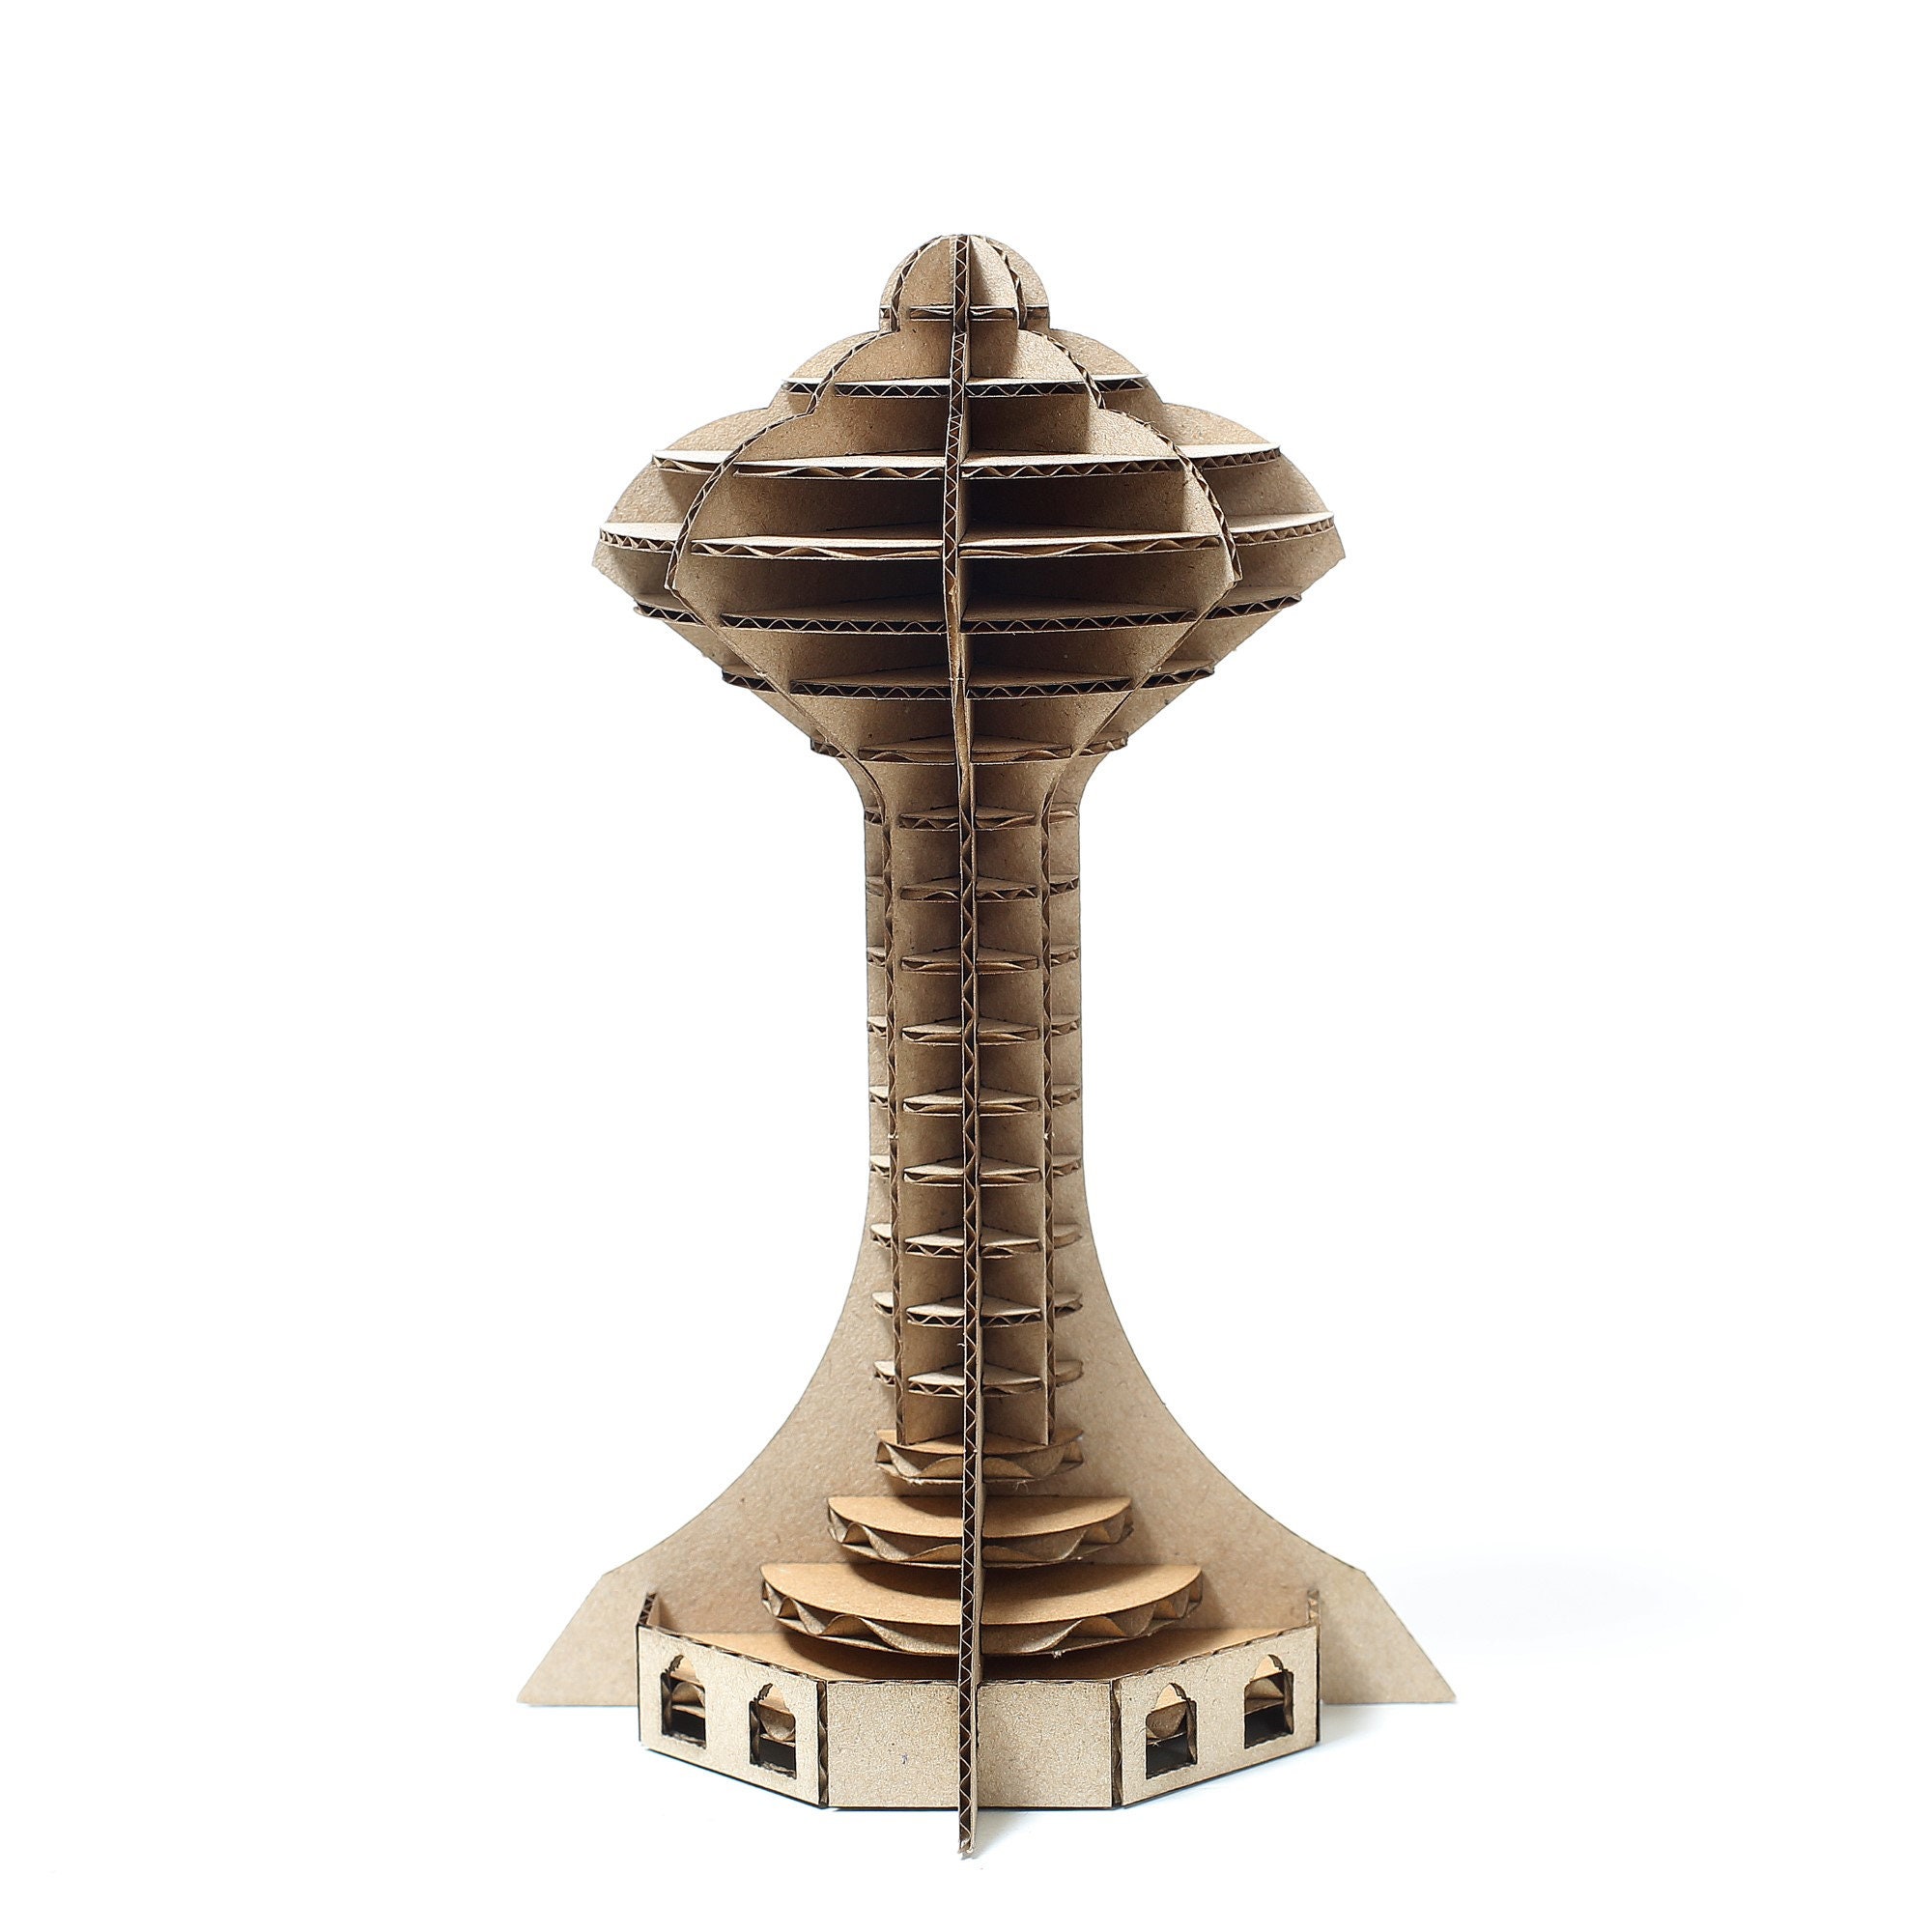 Kuwait Towers Water Storage Ball 3D Paper Puzzle Building Model Toy Arab  Travel